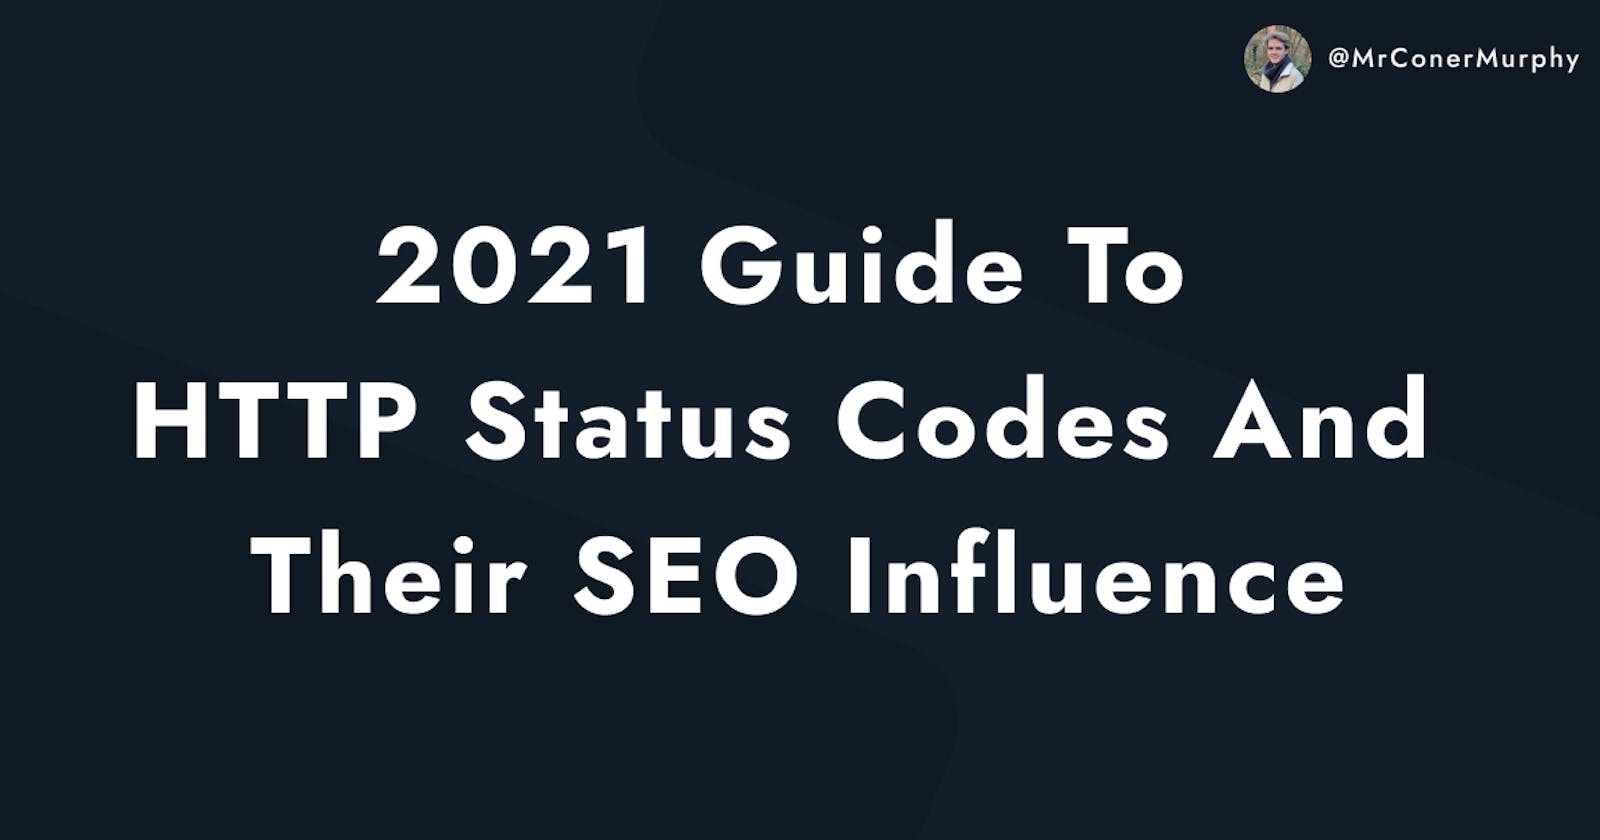 The Complete 2021 Guide to HTTP Status Codes and Their SEO Influence